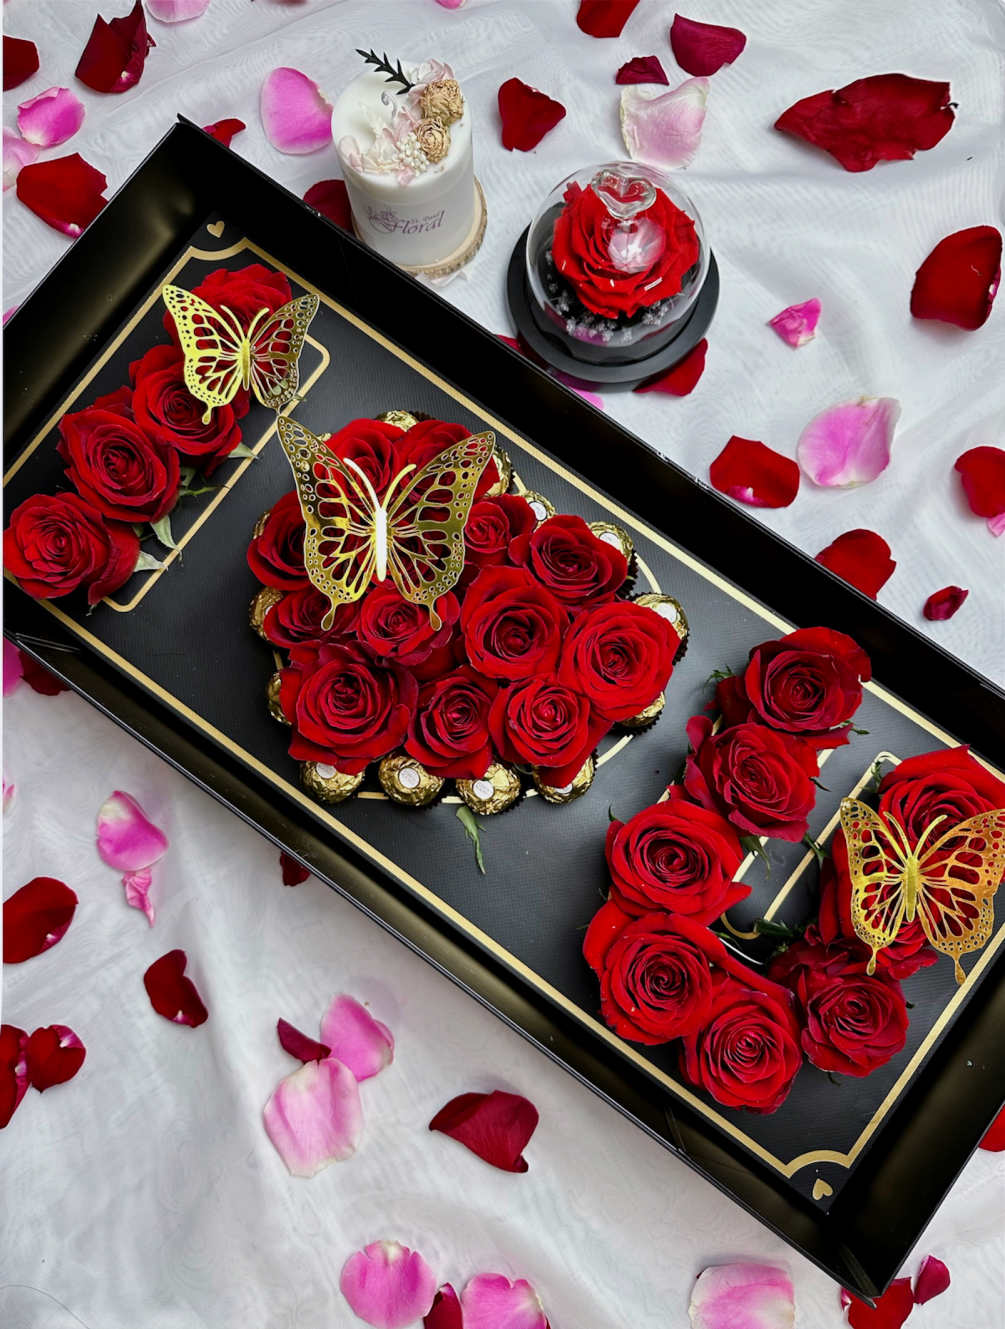 Express your love with this 2 dozens red roses arranged in a